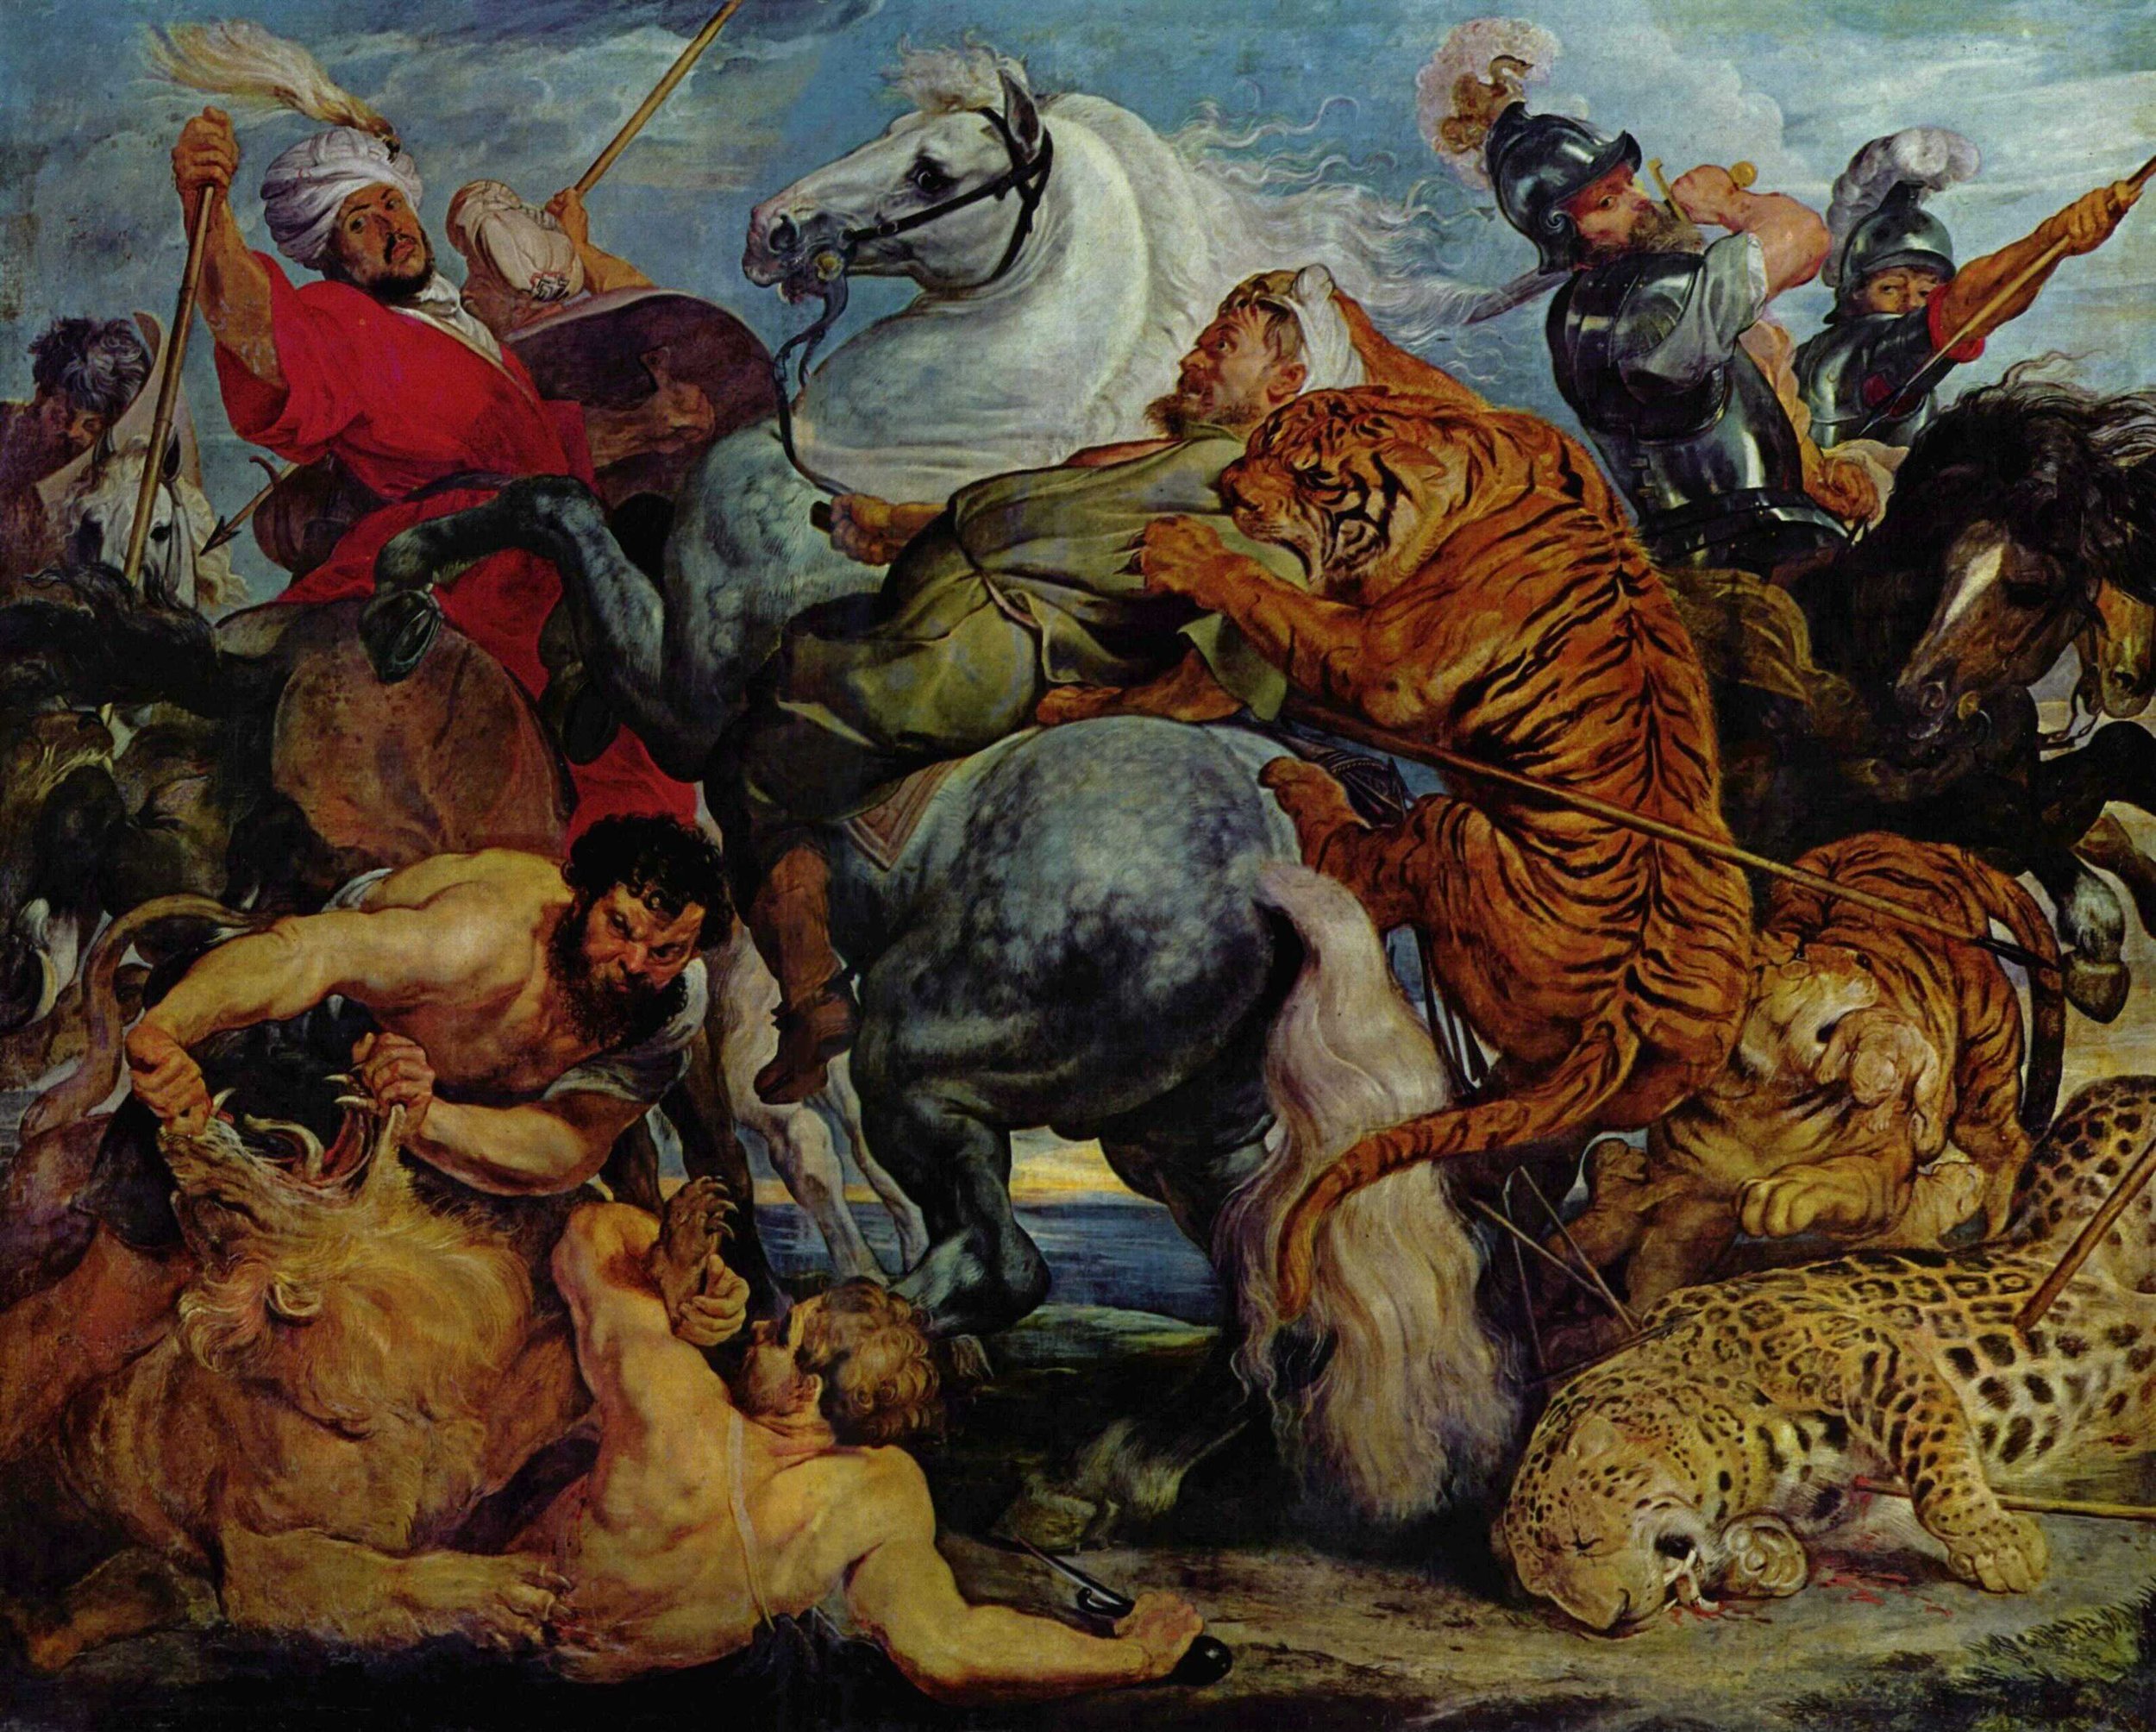 Lunar New Year 2022: Tigers In Art History